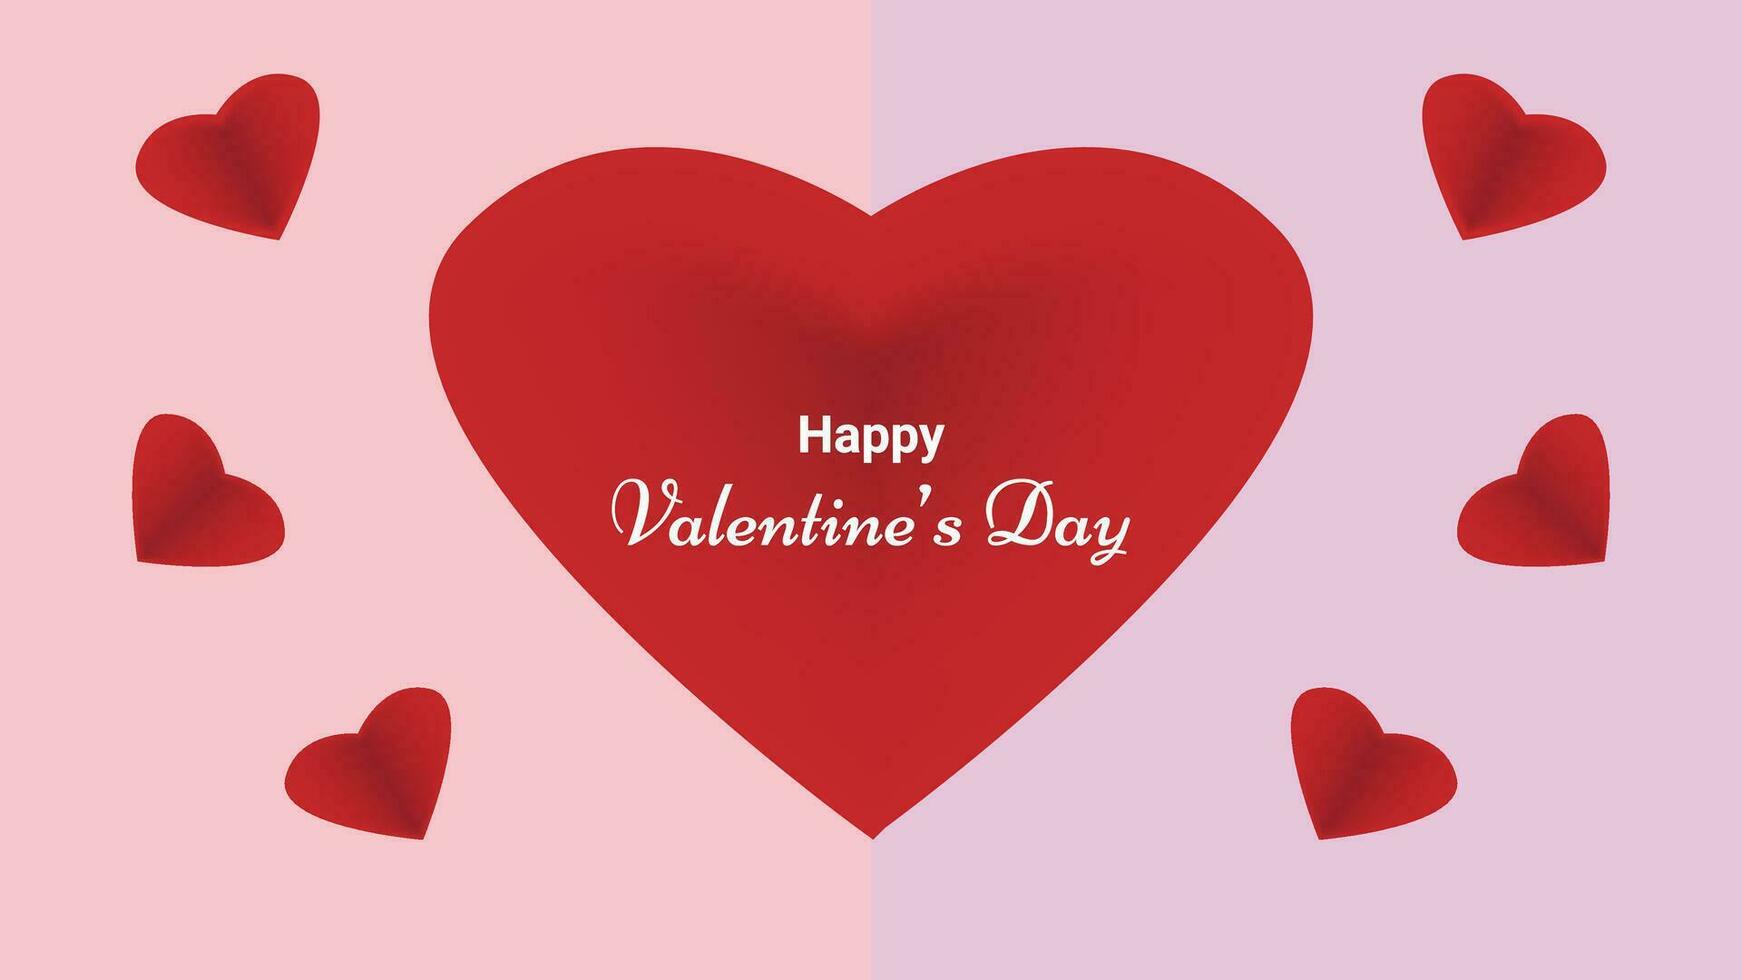 Happy Valentine's Day with Heart and Text vector